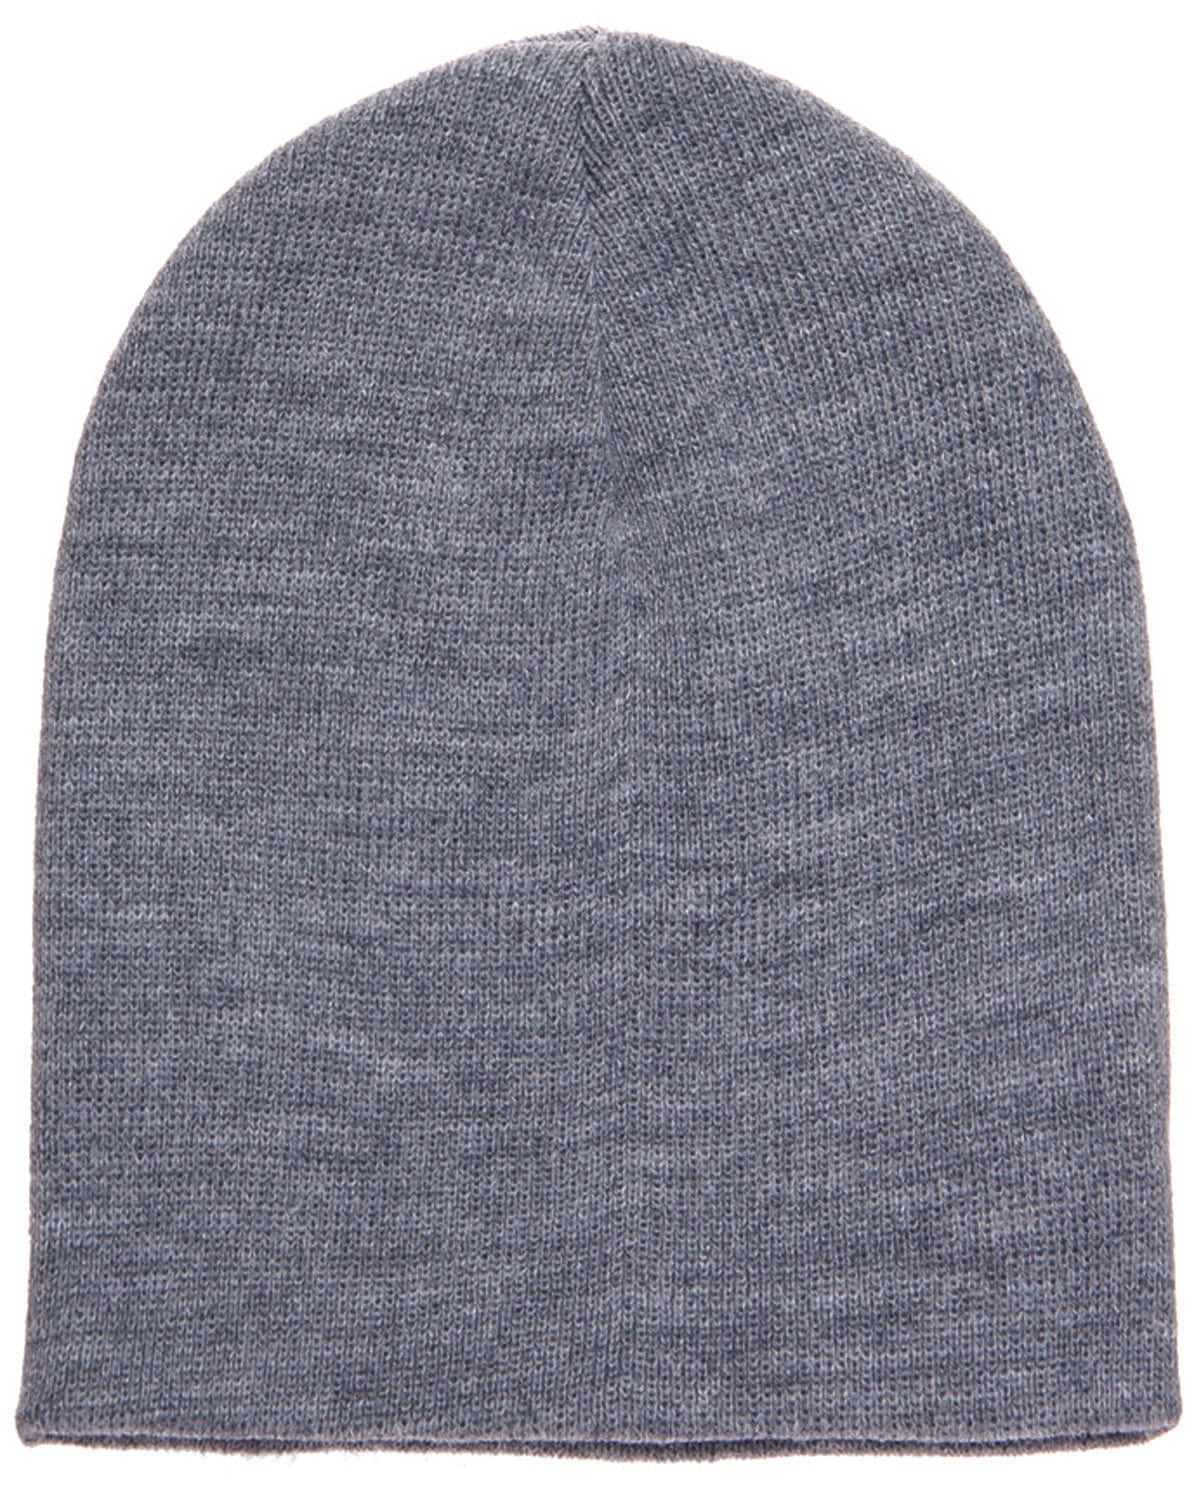 Yupoong Beanie Knit Adult 1500: